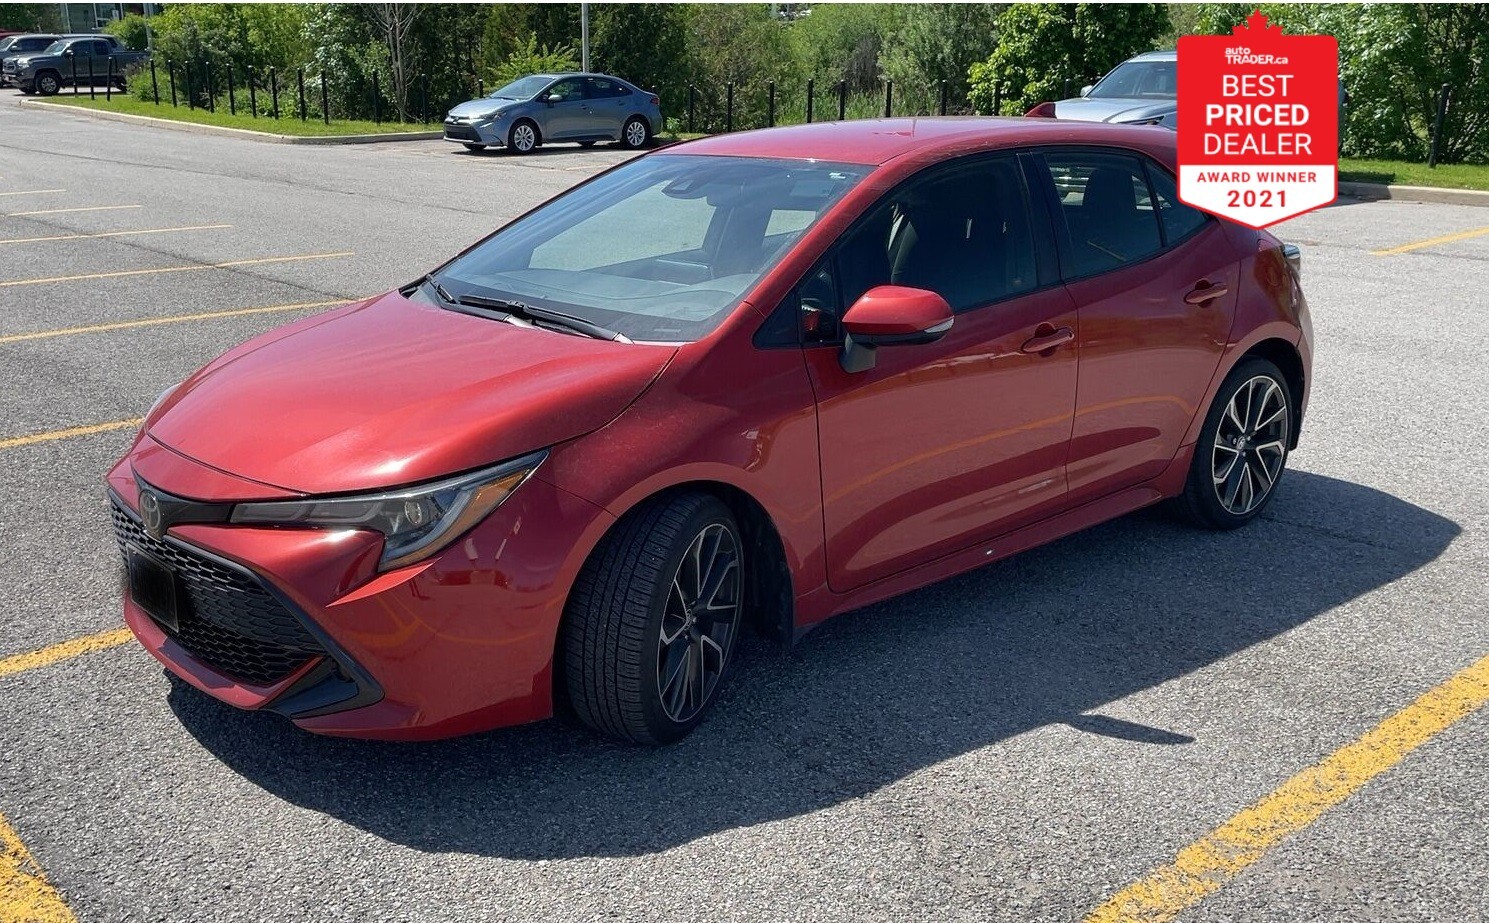 2019 Toyota Corolla Hatchback SE, Accident free, 1 Owner, Dealership Maintained